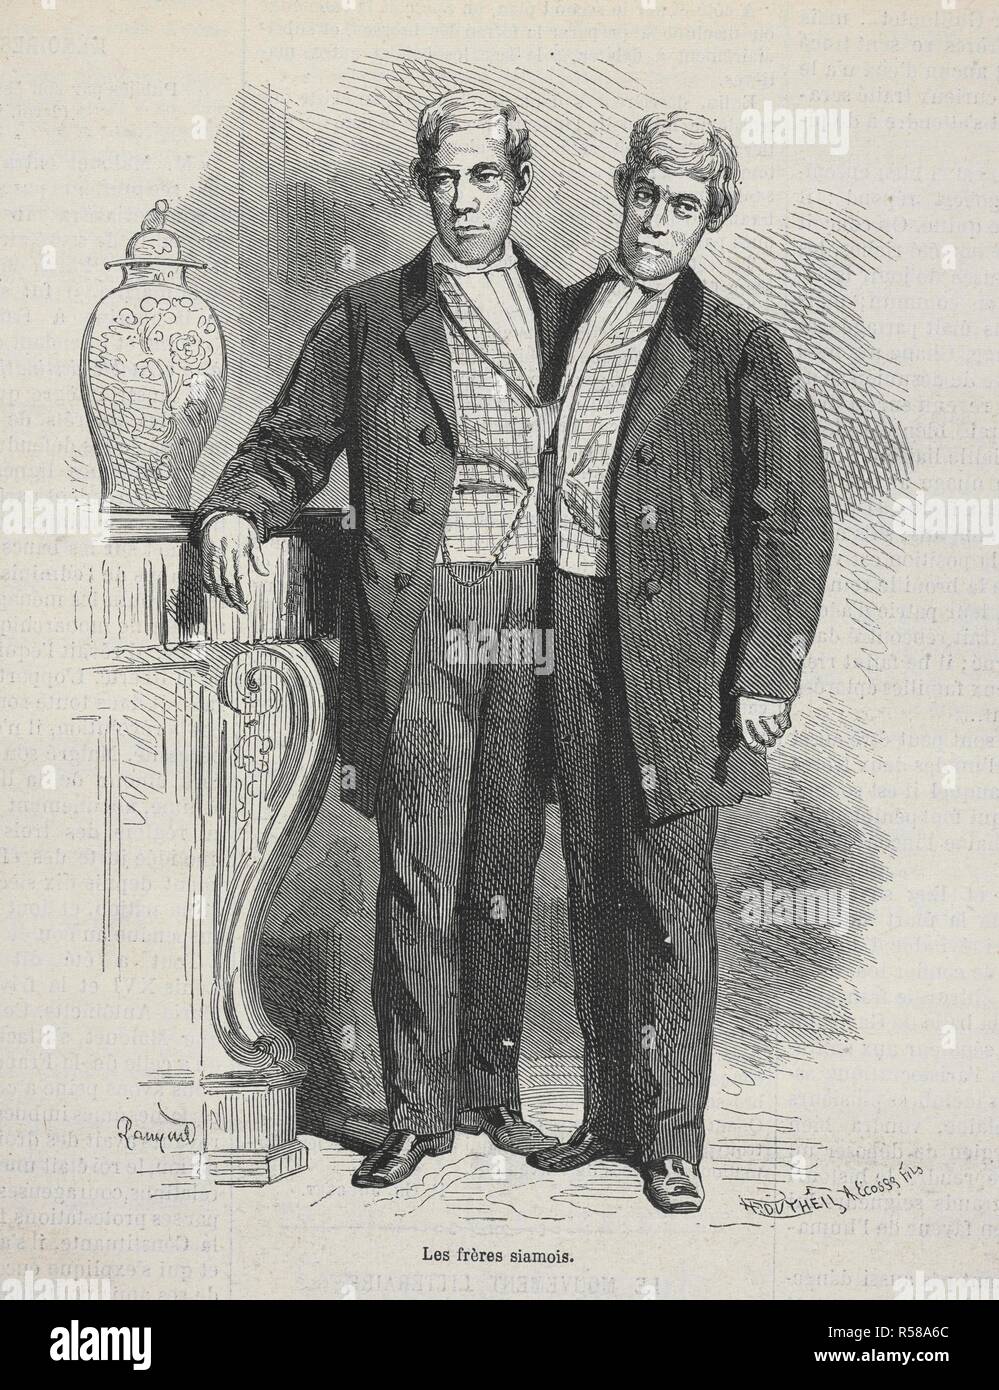 Les frÃ¨res Siamois.'  Chang and Eng Bunker (May 11, 1811 â€“ January 17, 1874) were Thai-American conjoined twin brothers whose condition and birthplace became the basis for the term 'Siamese twins'. L'illustration : journal universel. Paris : J.J. Dubochet, 1843-1944. (1868). Source: LOU.F63, vol.II page 189. Stock Photo